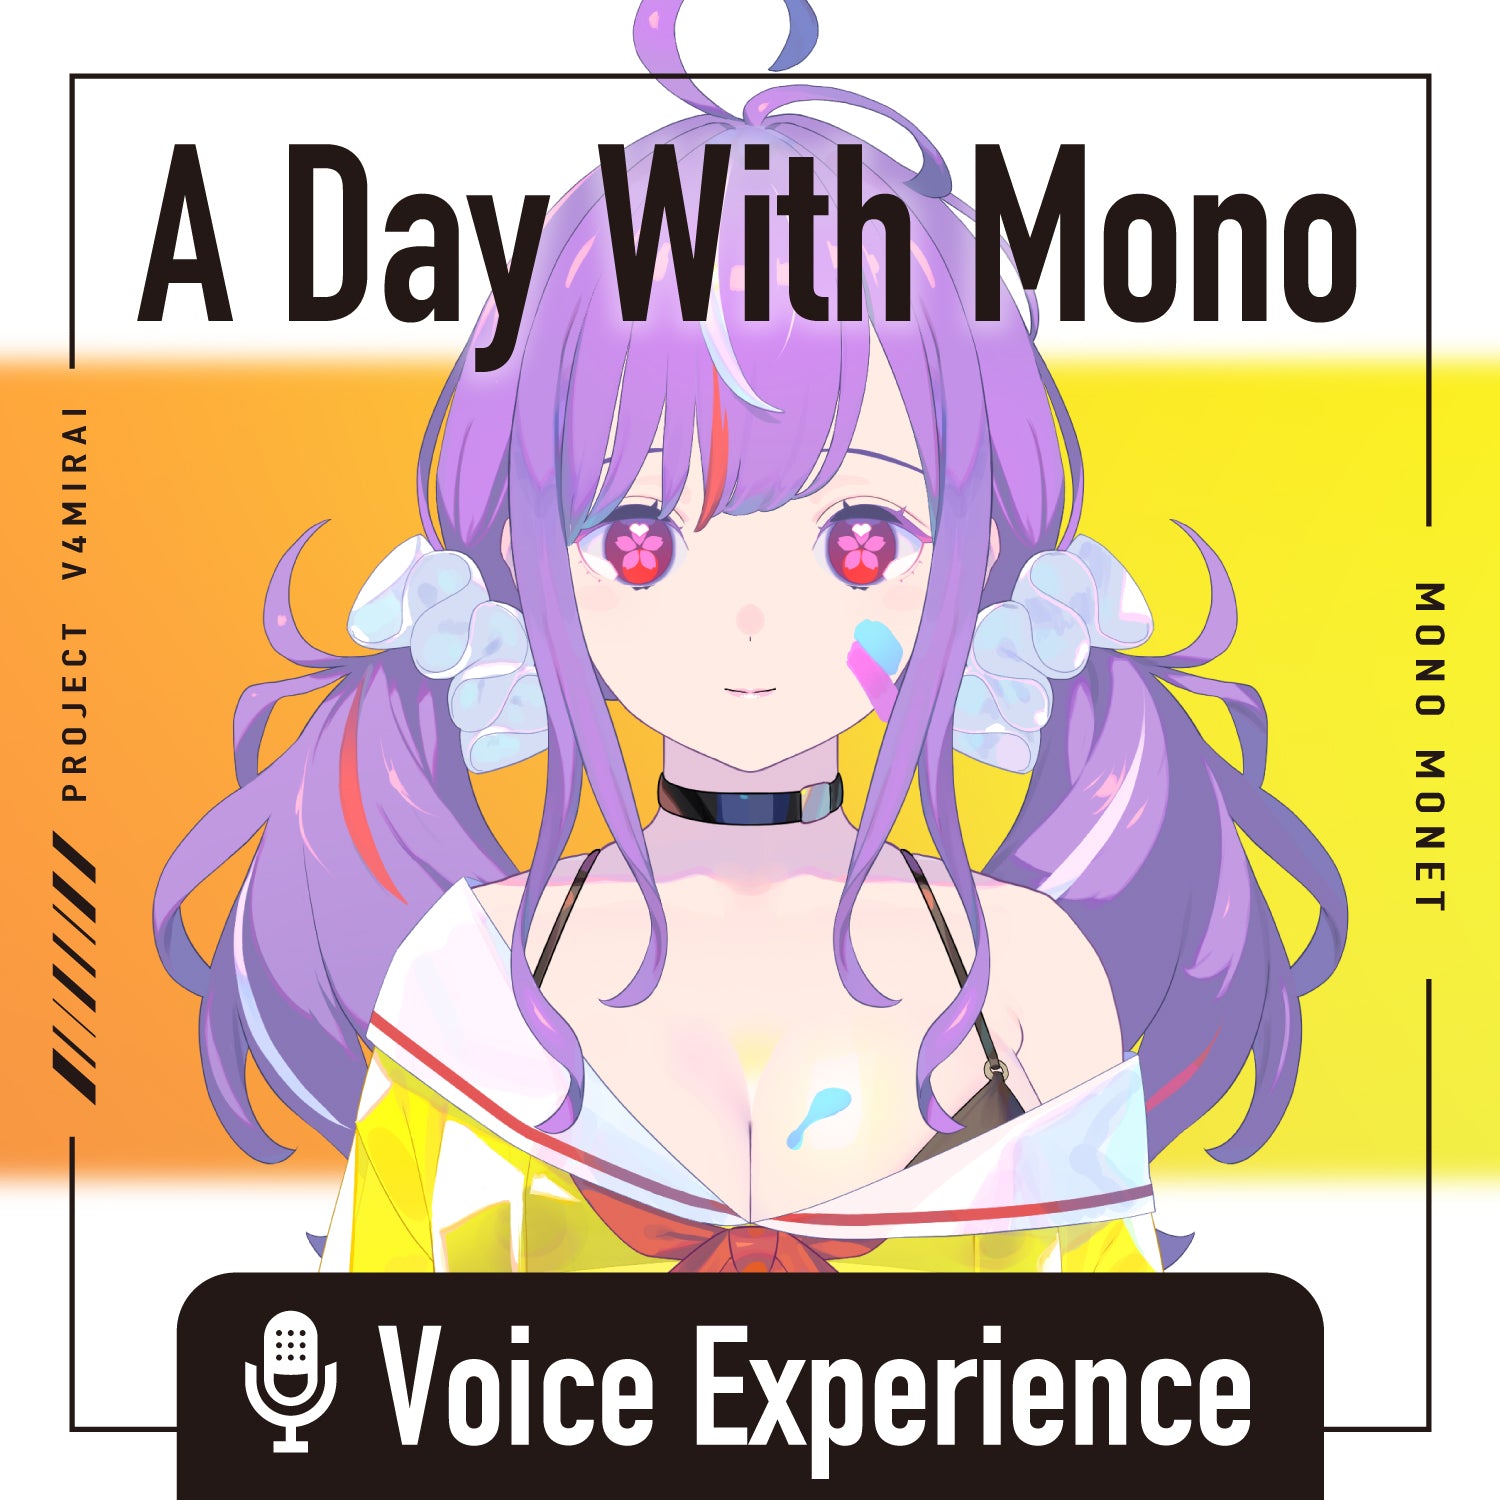 A Day With Mono - Voice Experience